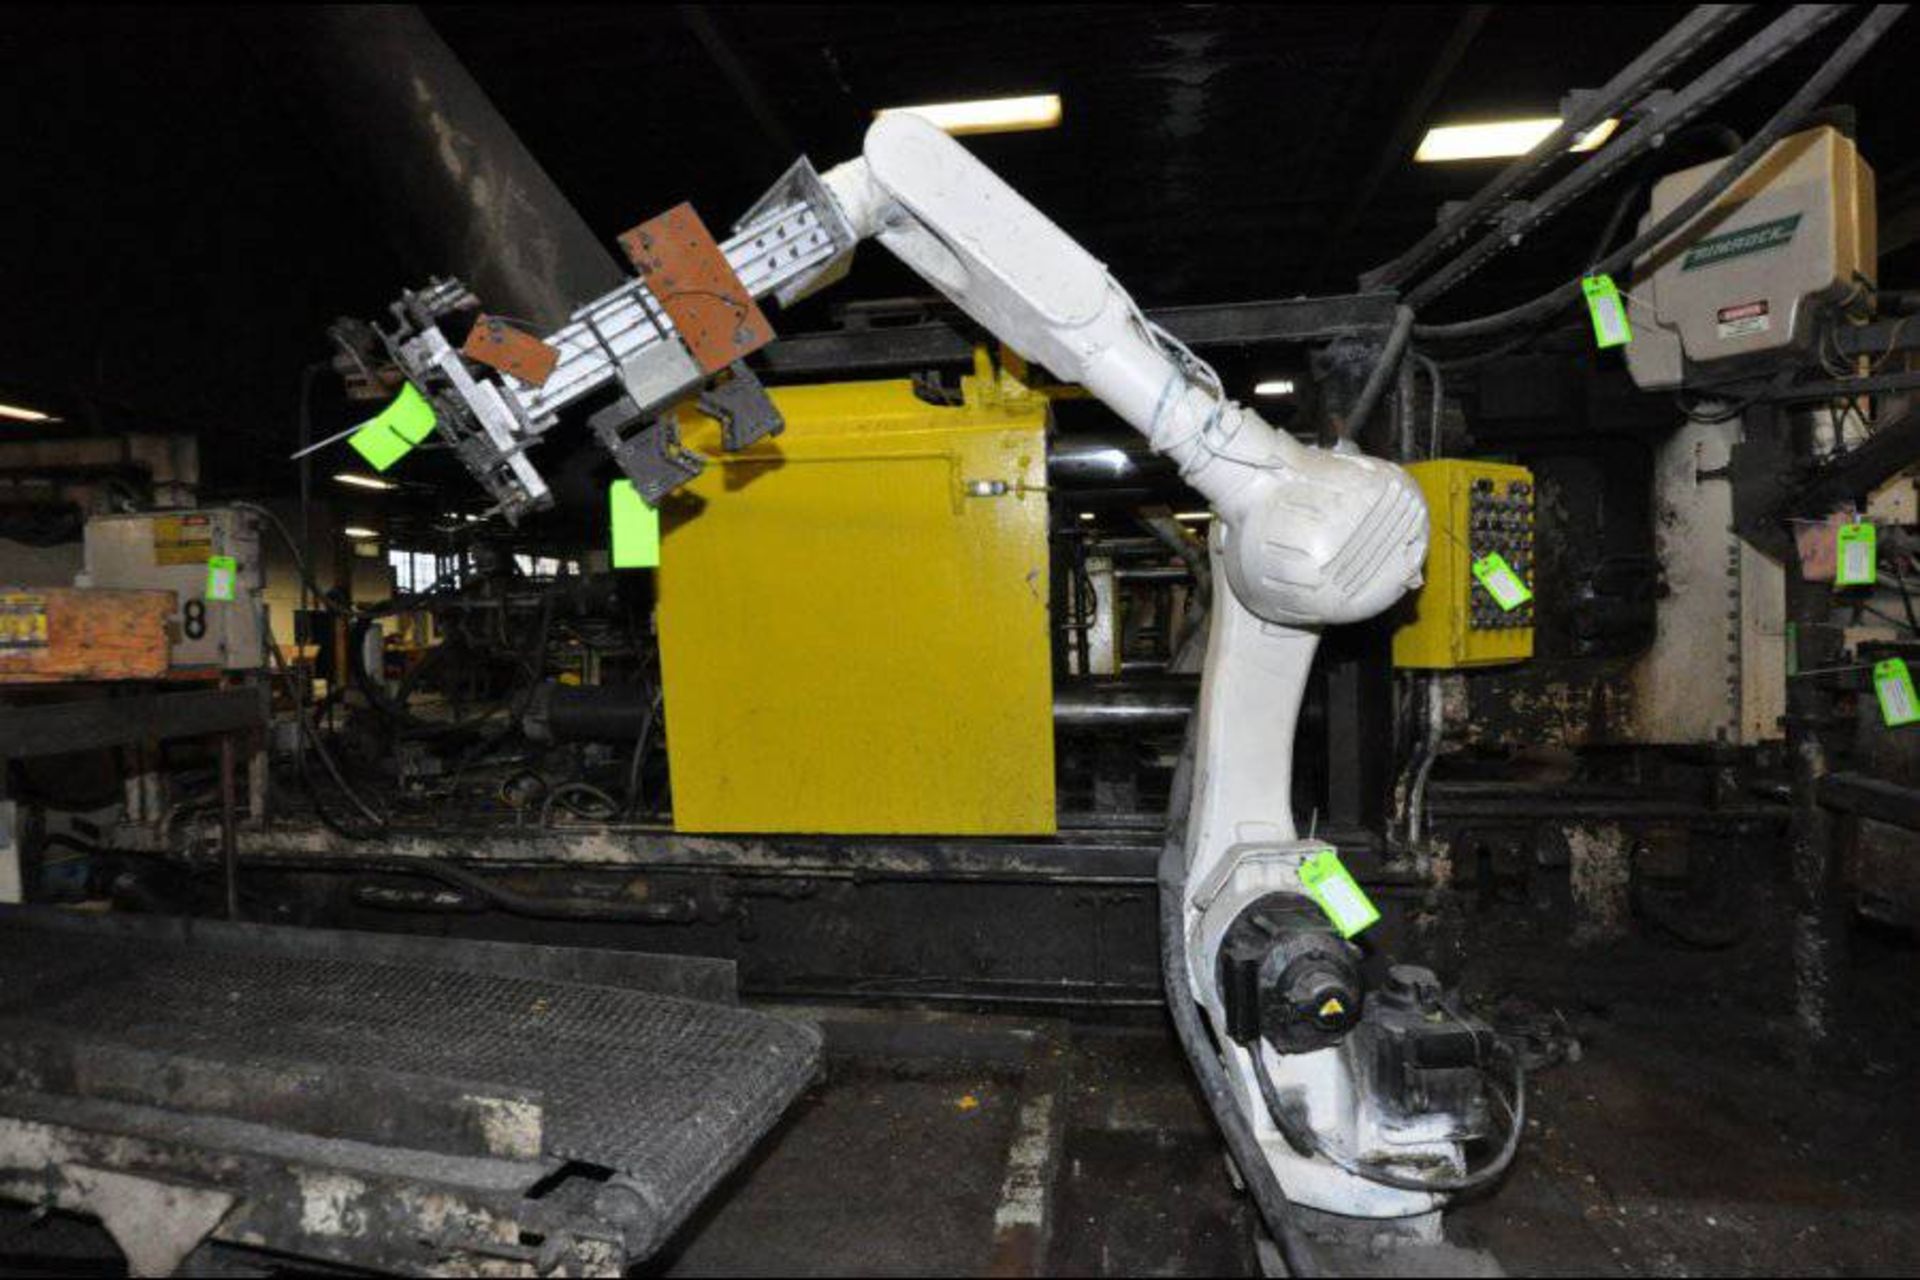 Kawasaki RS-080N Six Axis Foundry Rated Industrial Robot